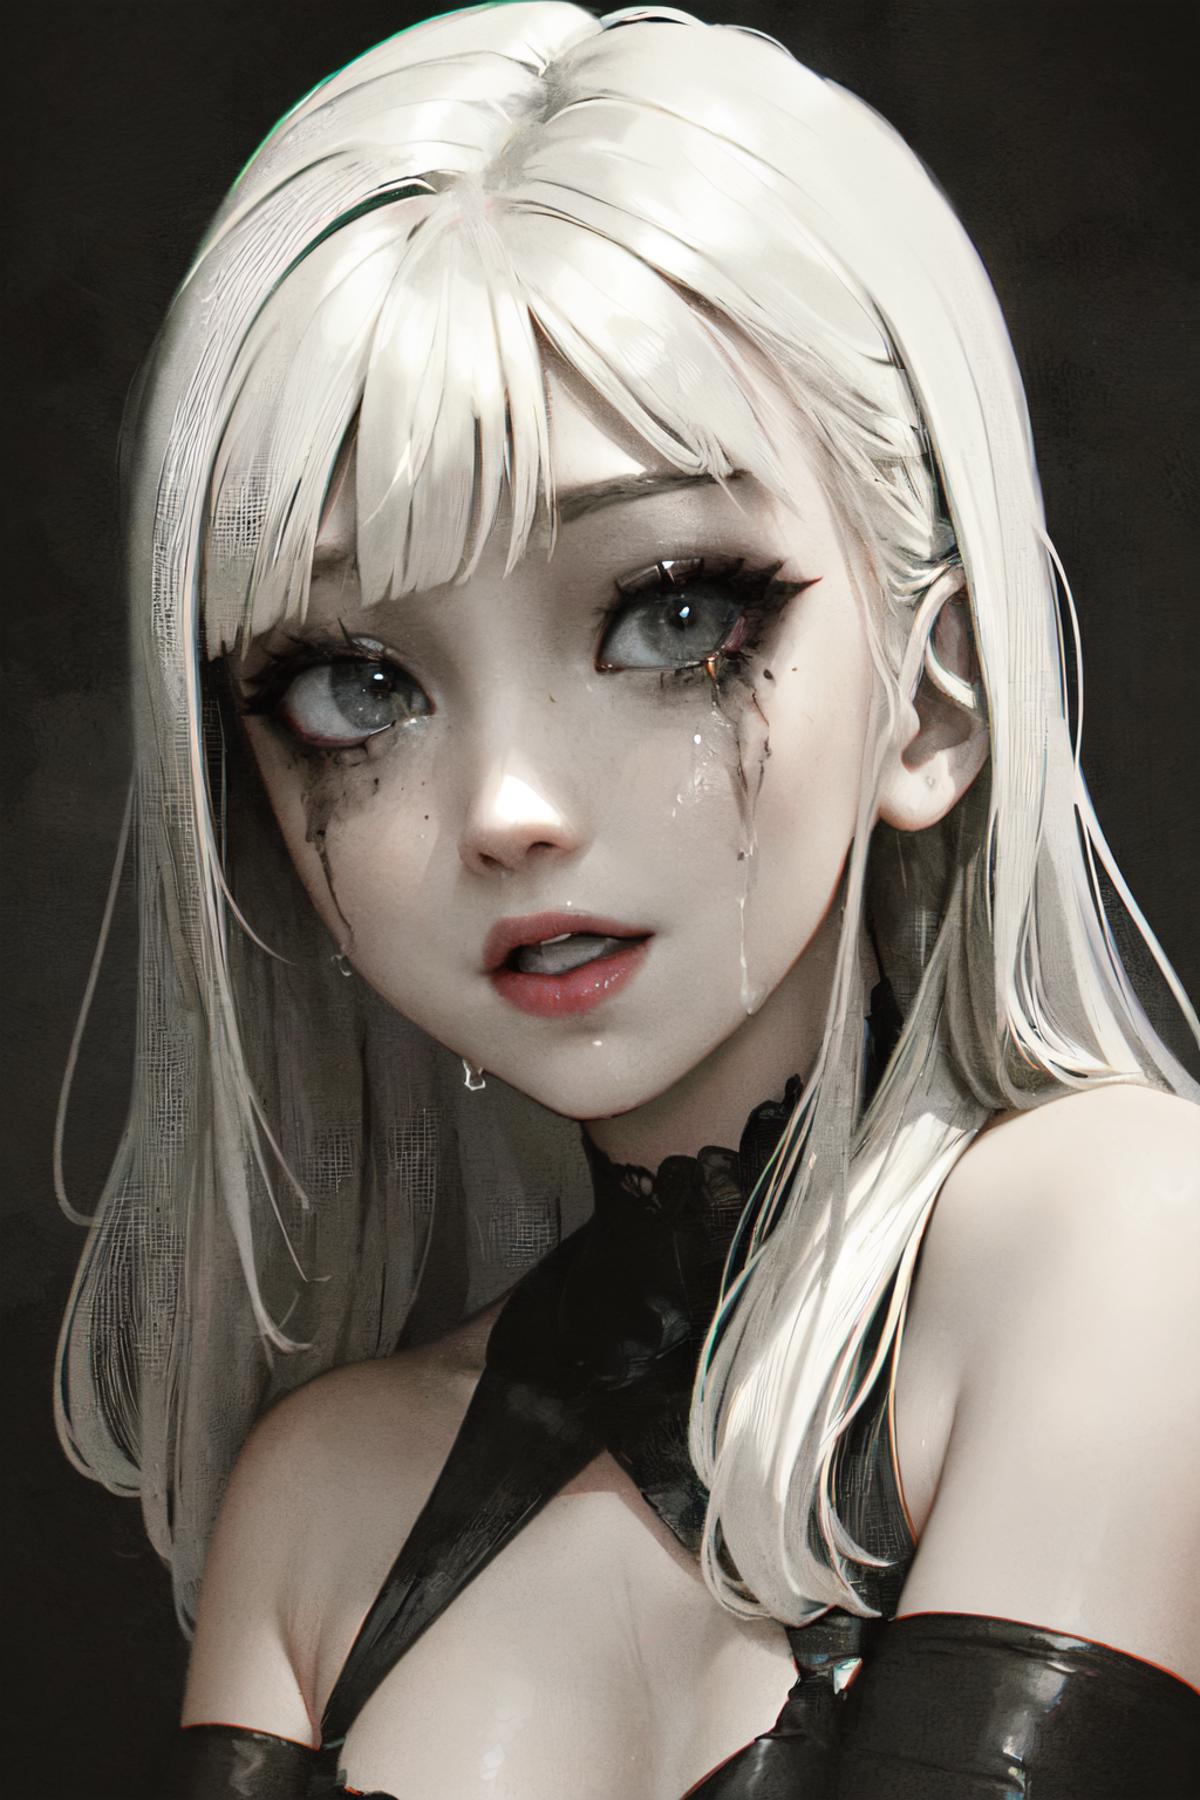 A sad, white, blonde-haired girl with tear-soaked eyes and black lashes.